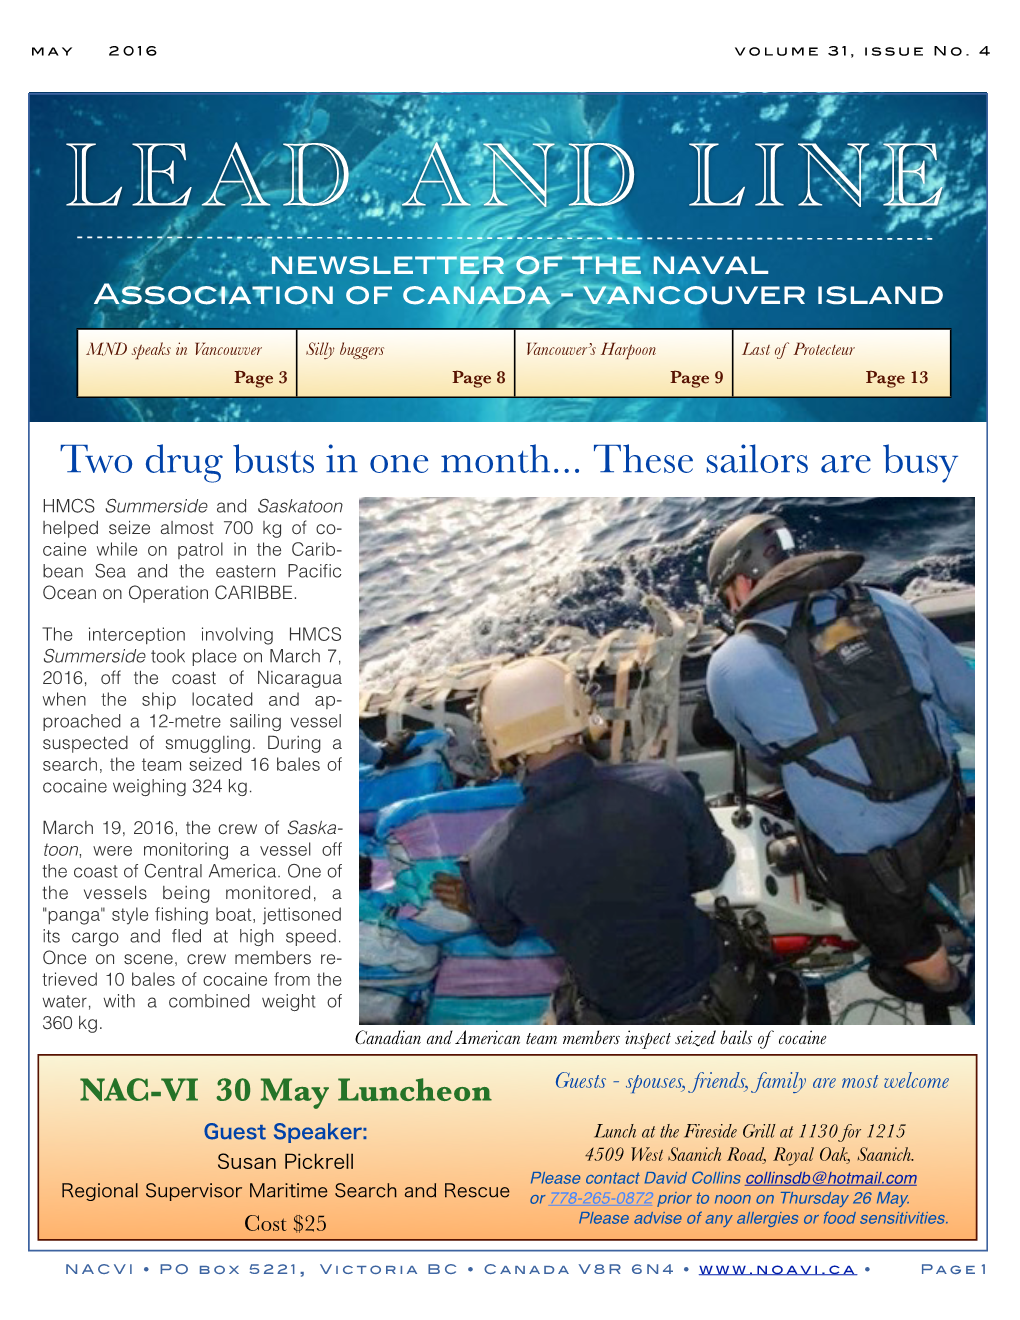 LEAD and LINE Newsletter of the Naval Association of Canada - Vancouver Island